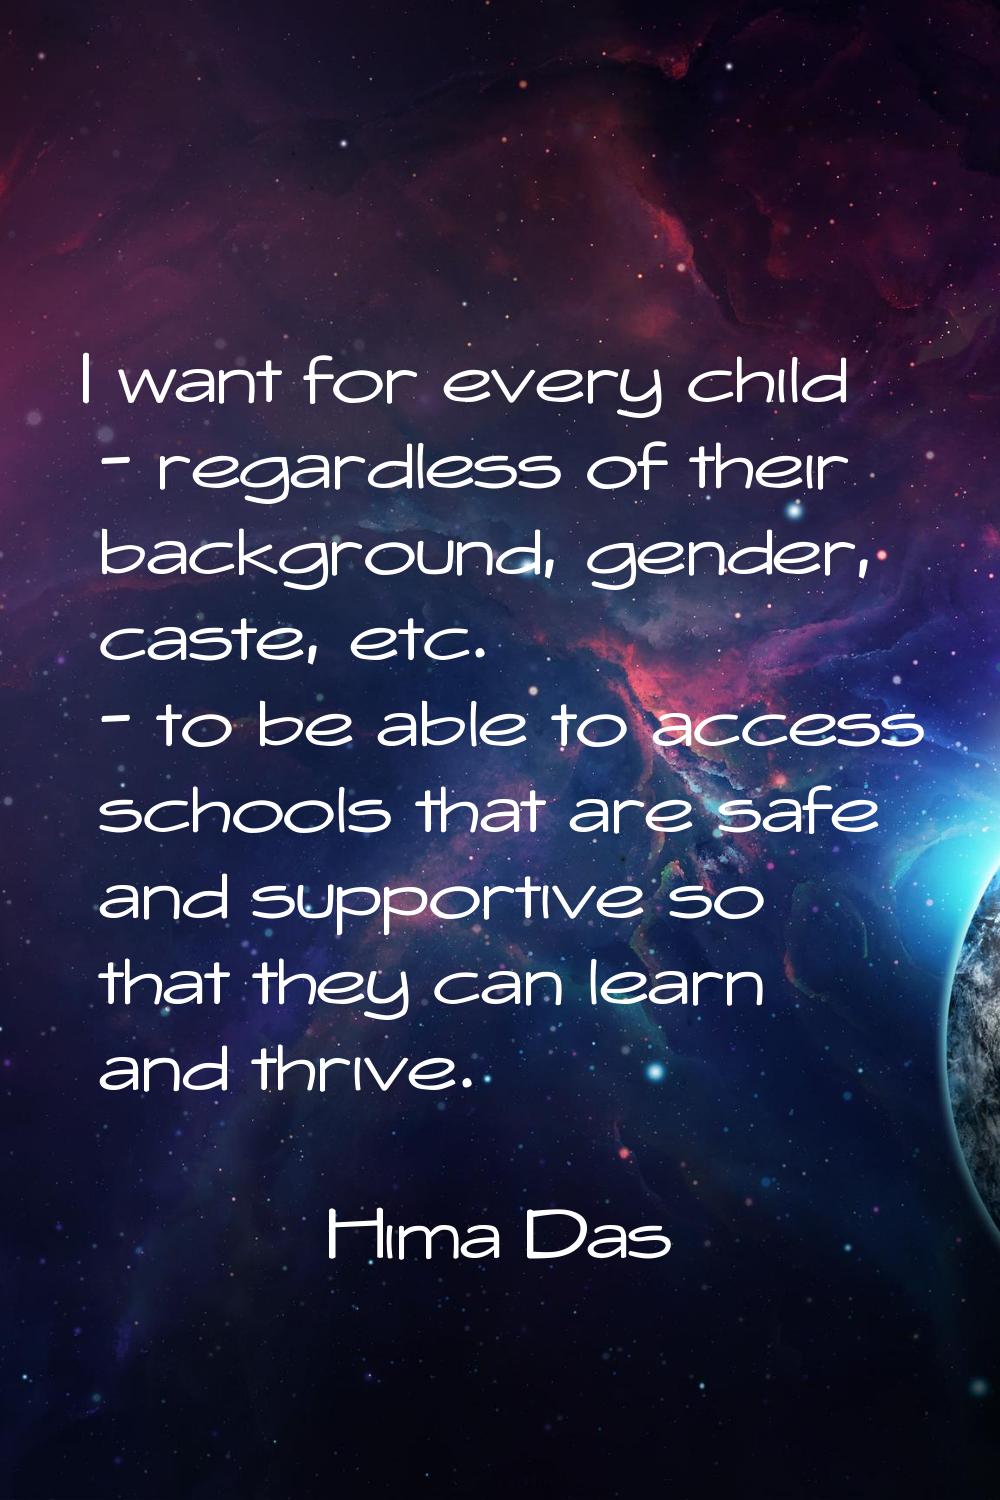 I want for every child - regardless of their background, gender, caste, etc. - to be able to access